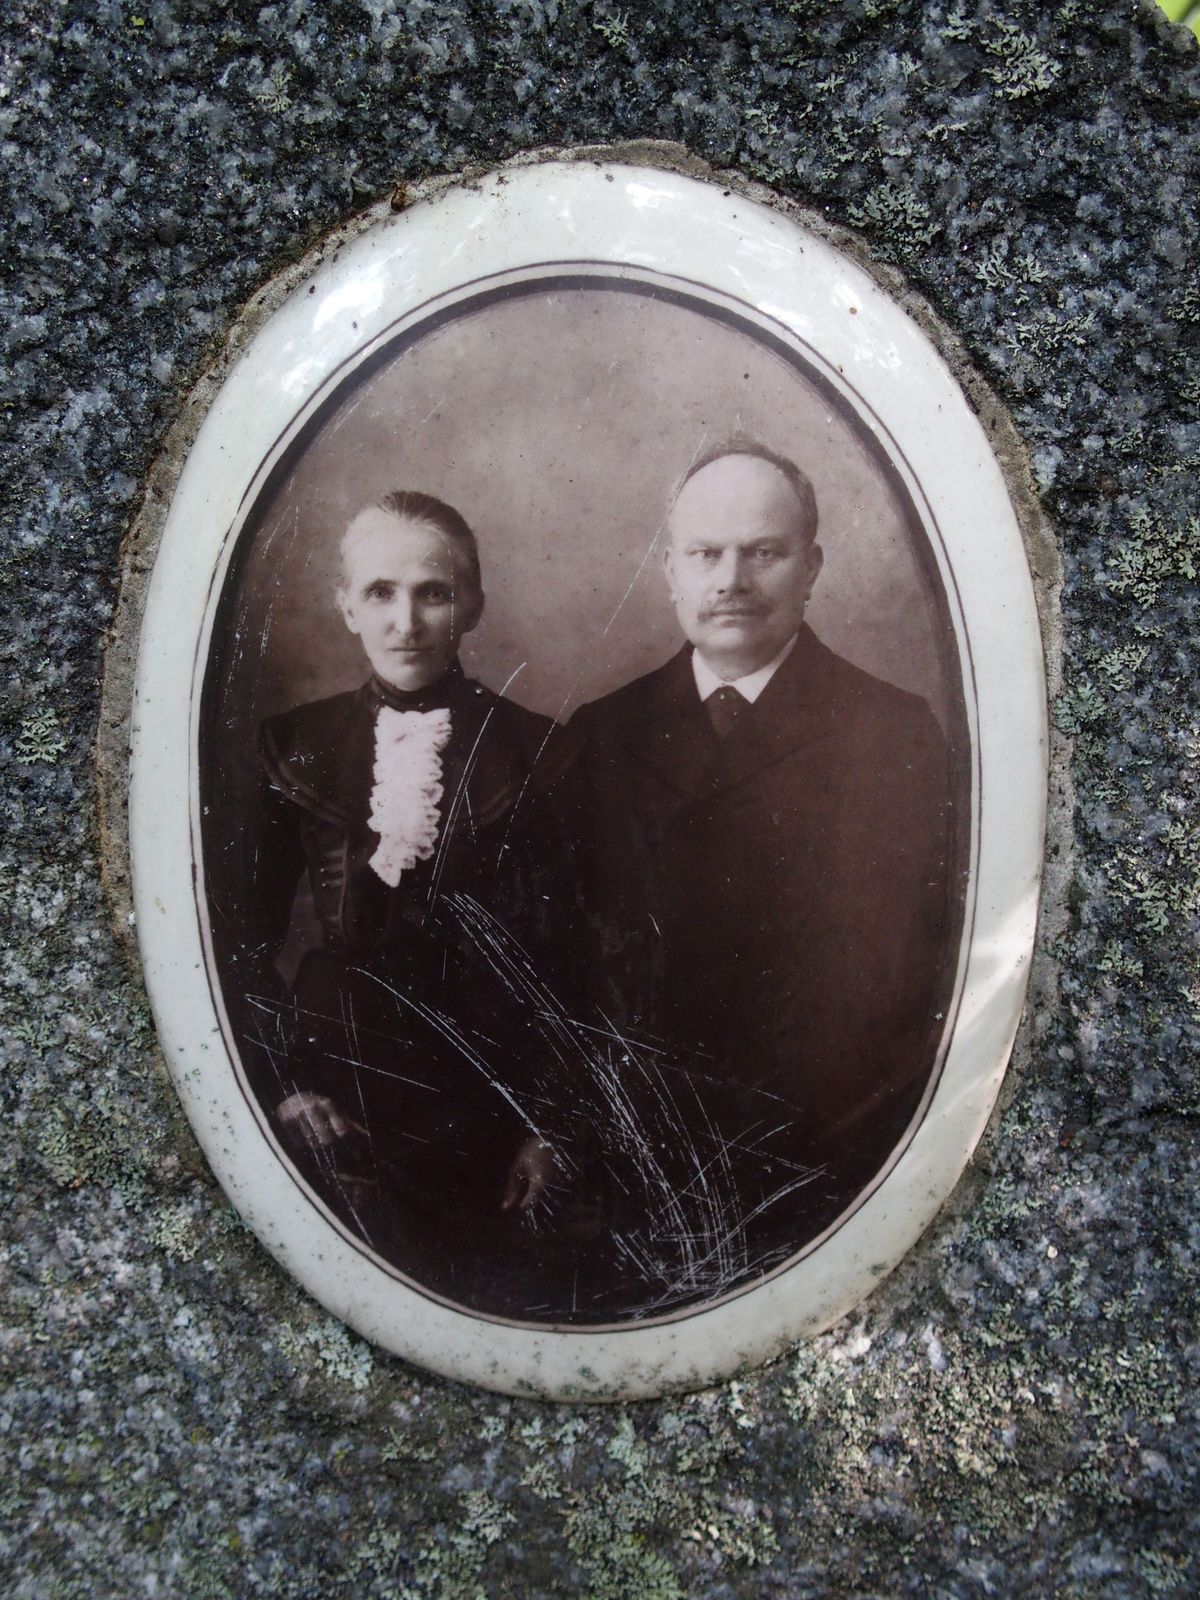 Gravestone photograph of the Bejnarowicz family, St Michael's cemetery in Riga, as of 2021.